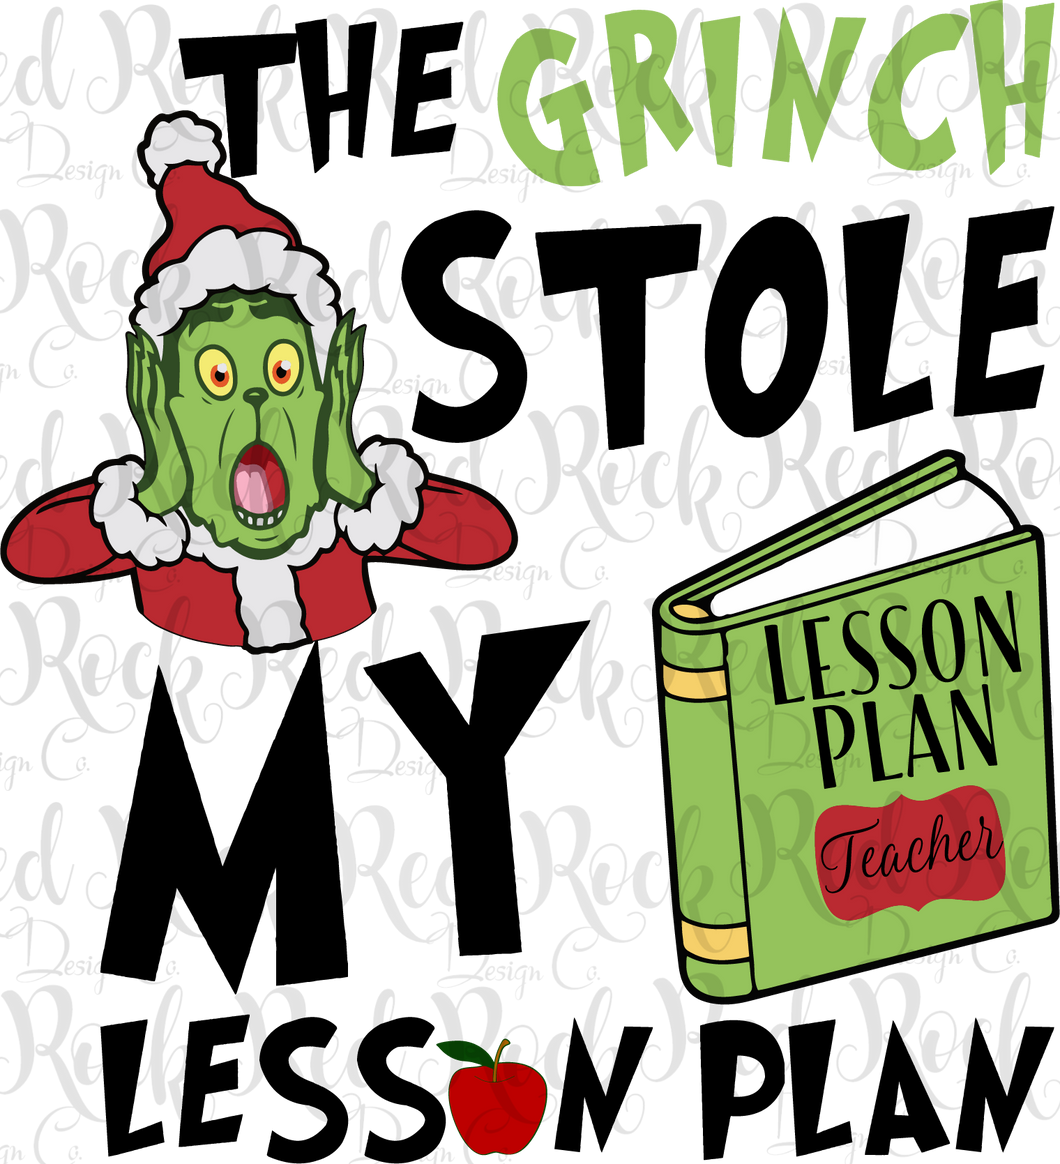 Grinch stole my lesson plan